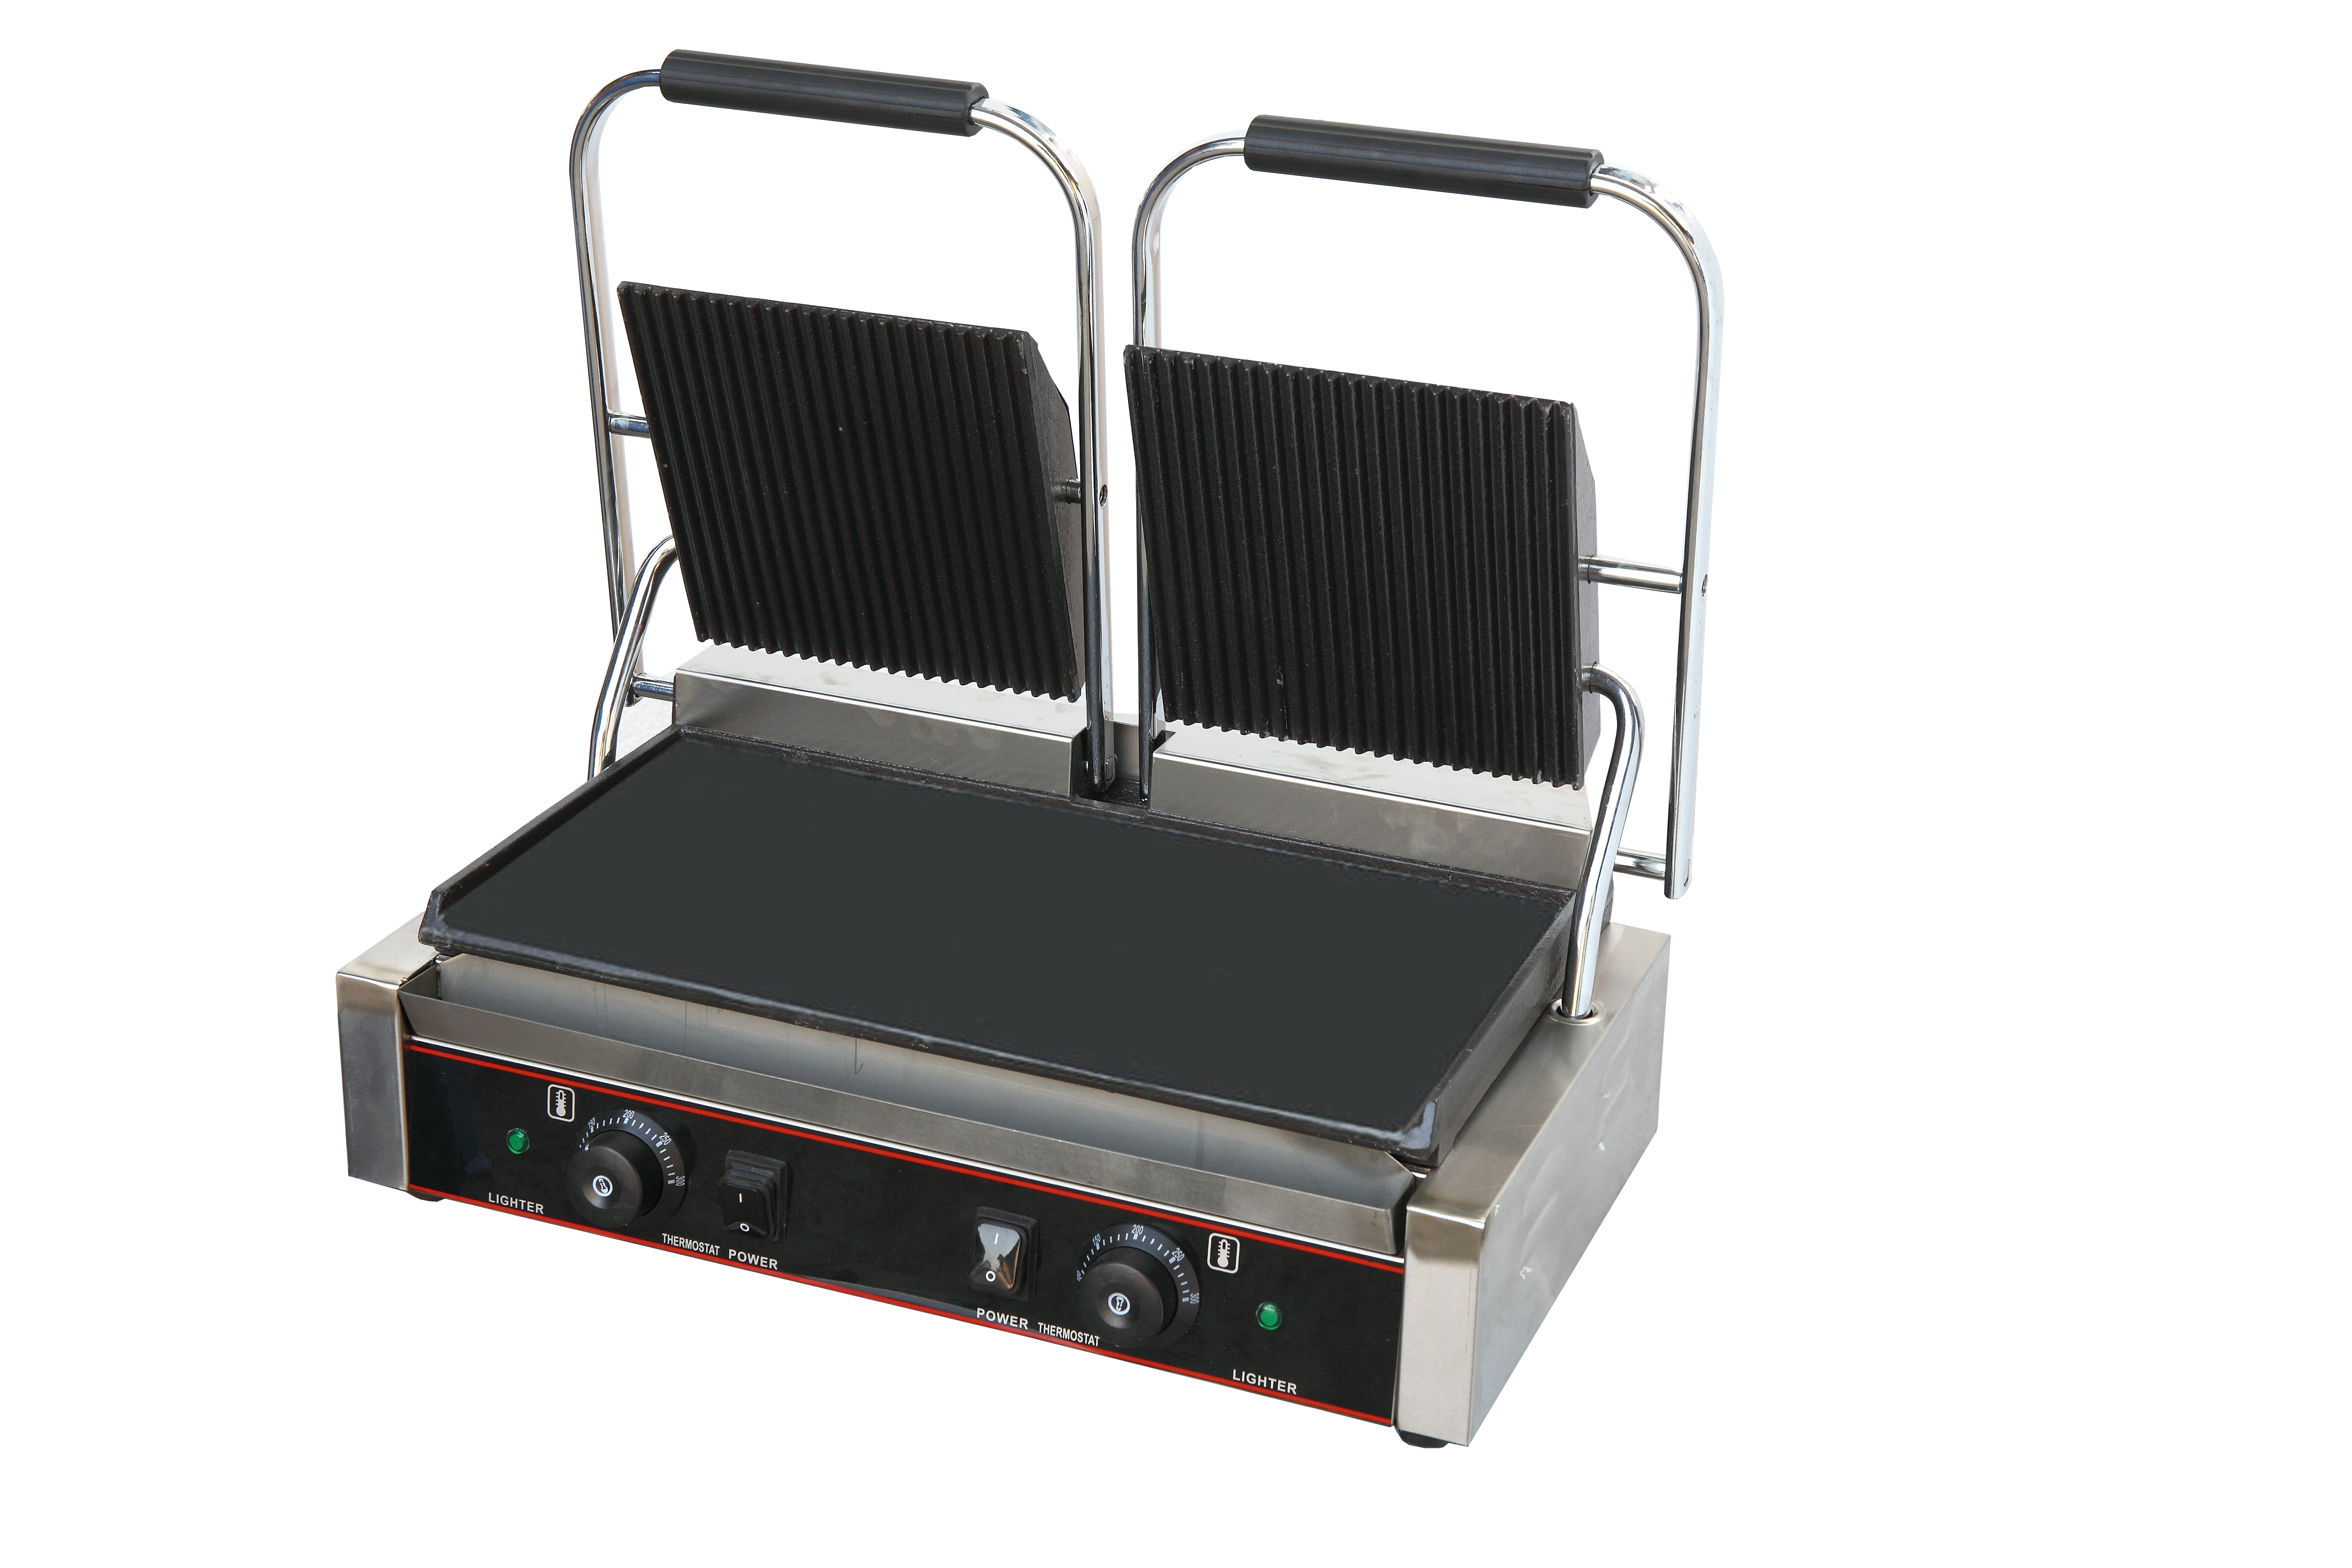 GRT-810-2A Hot Sale Electric Panini Sandwich Grill for Grilling Sandwich